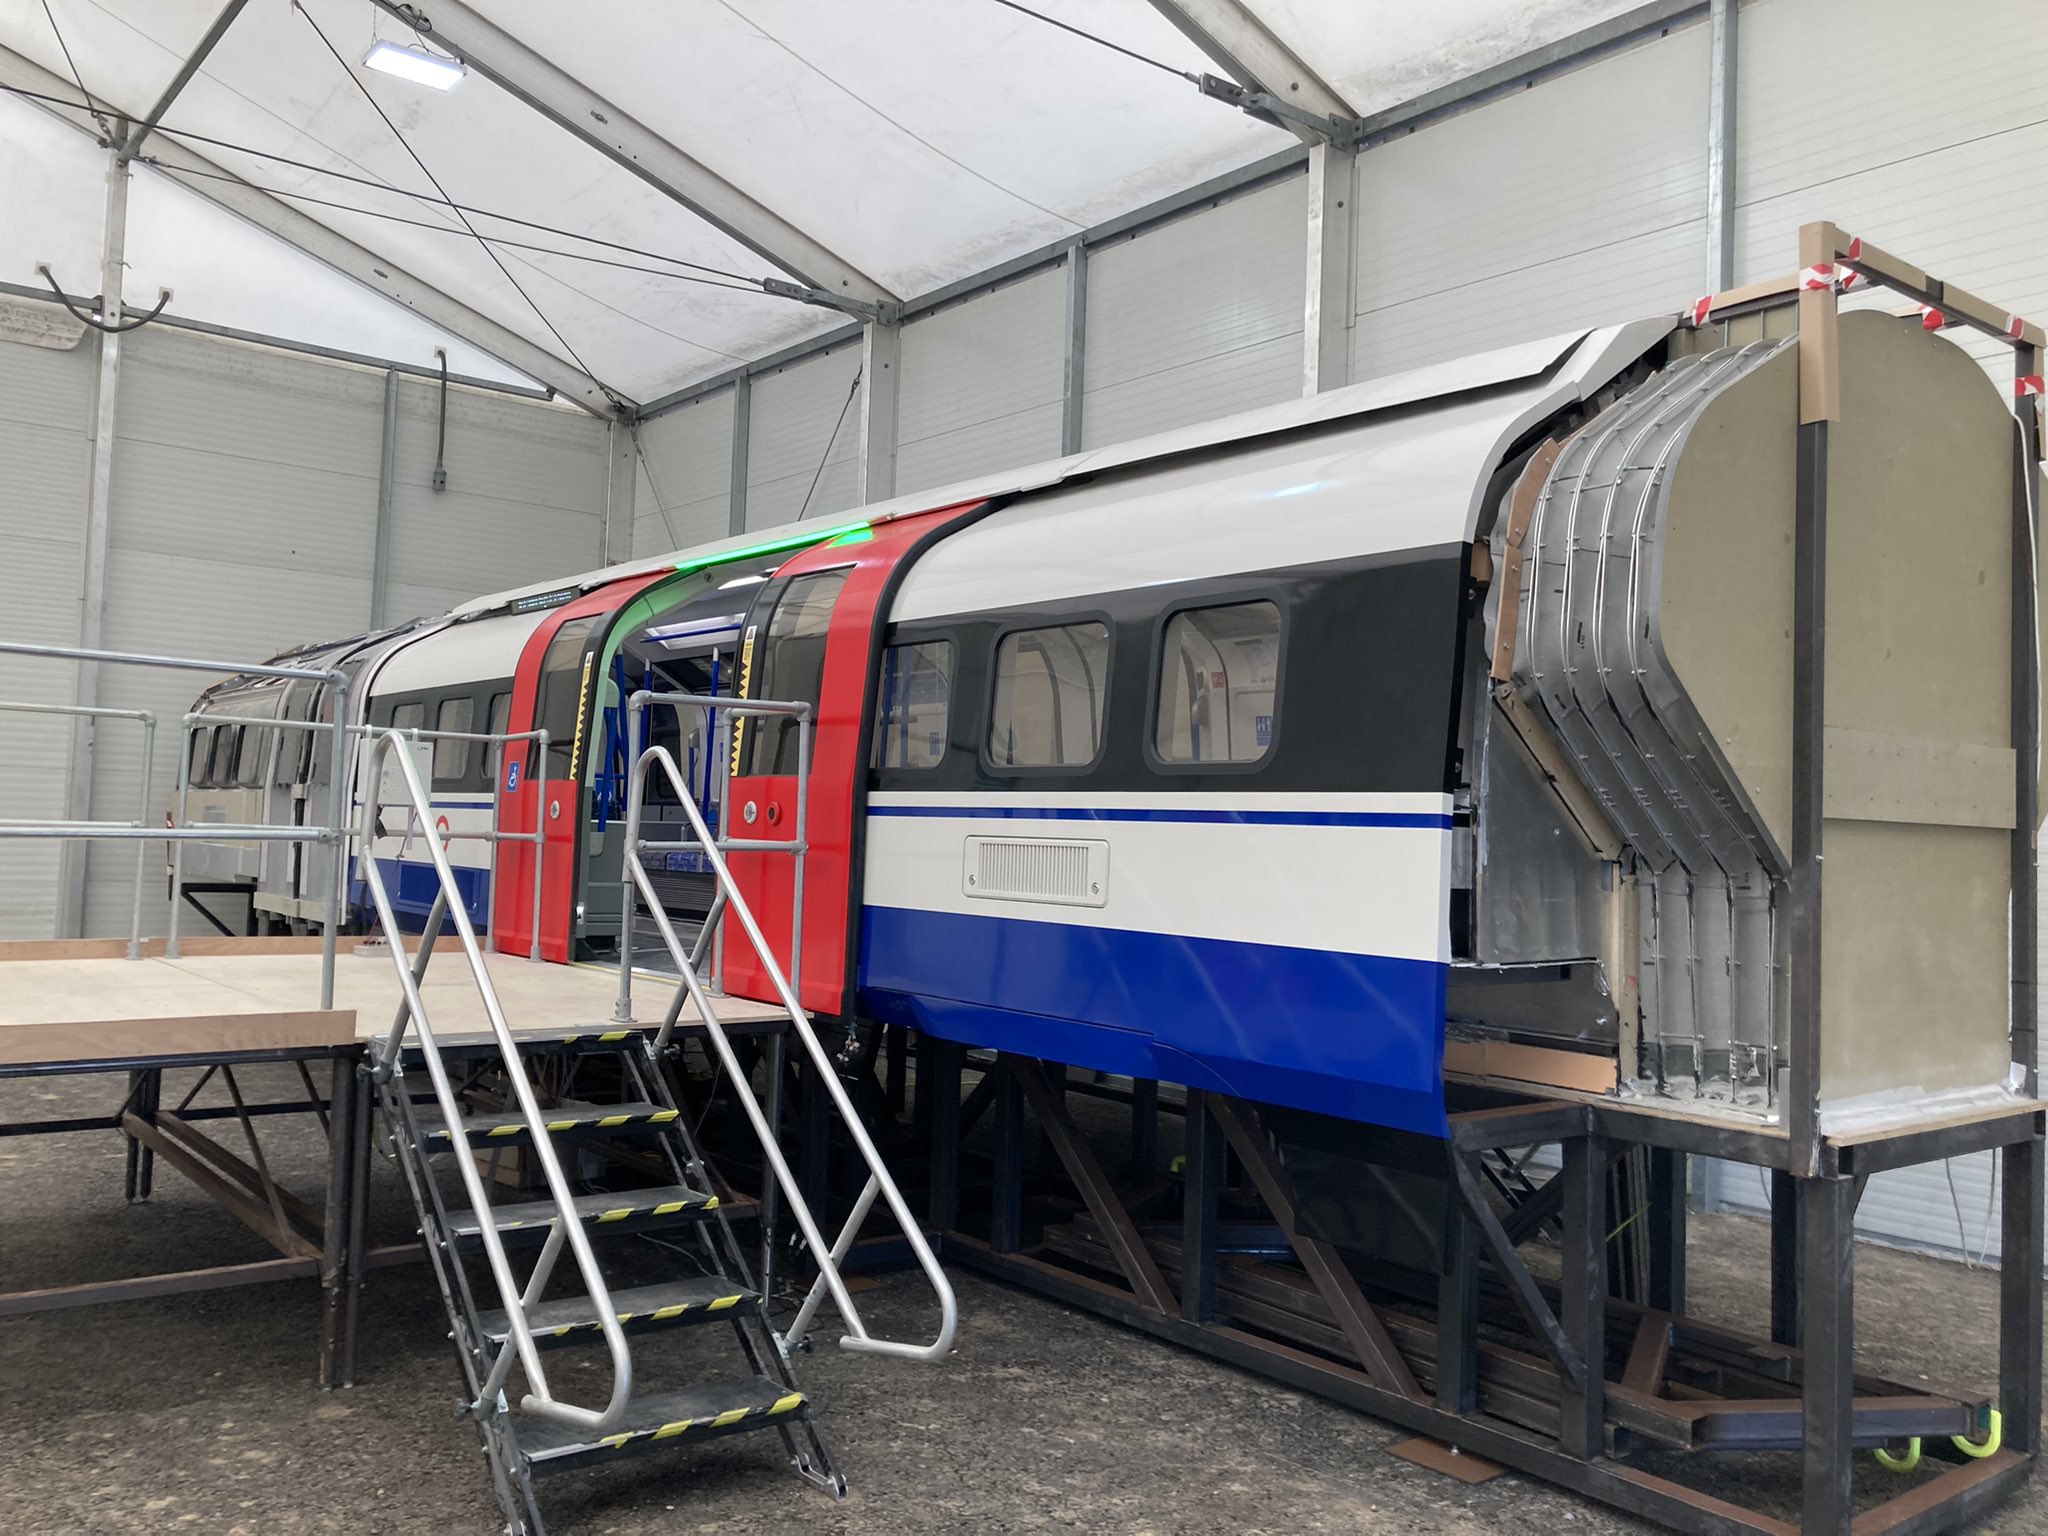 Mock-up of the Inspiro metro train car at the Siemens Mobility plant in Goole